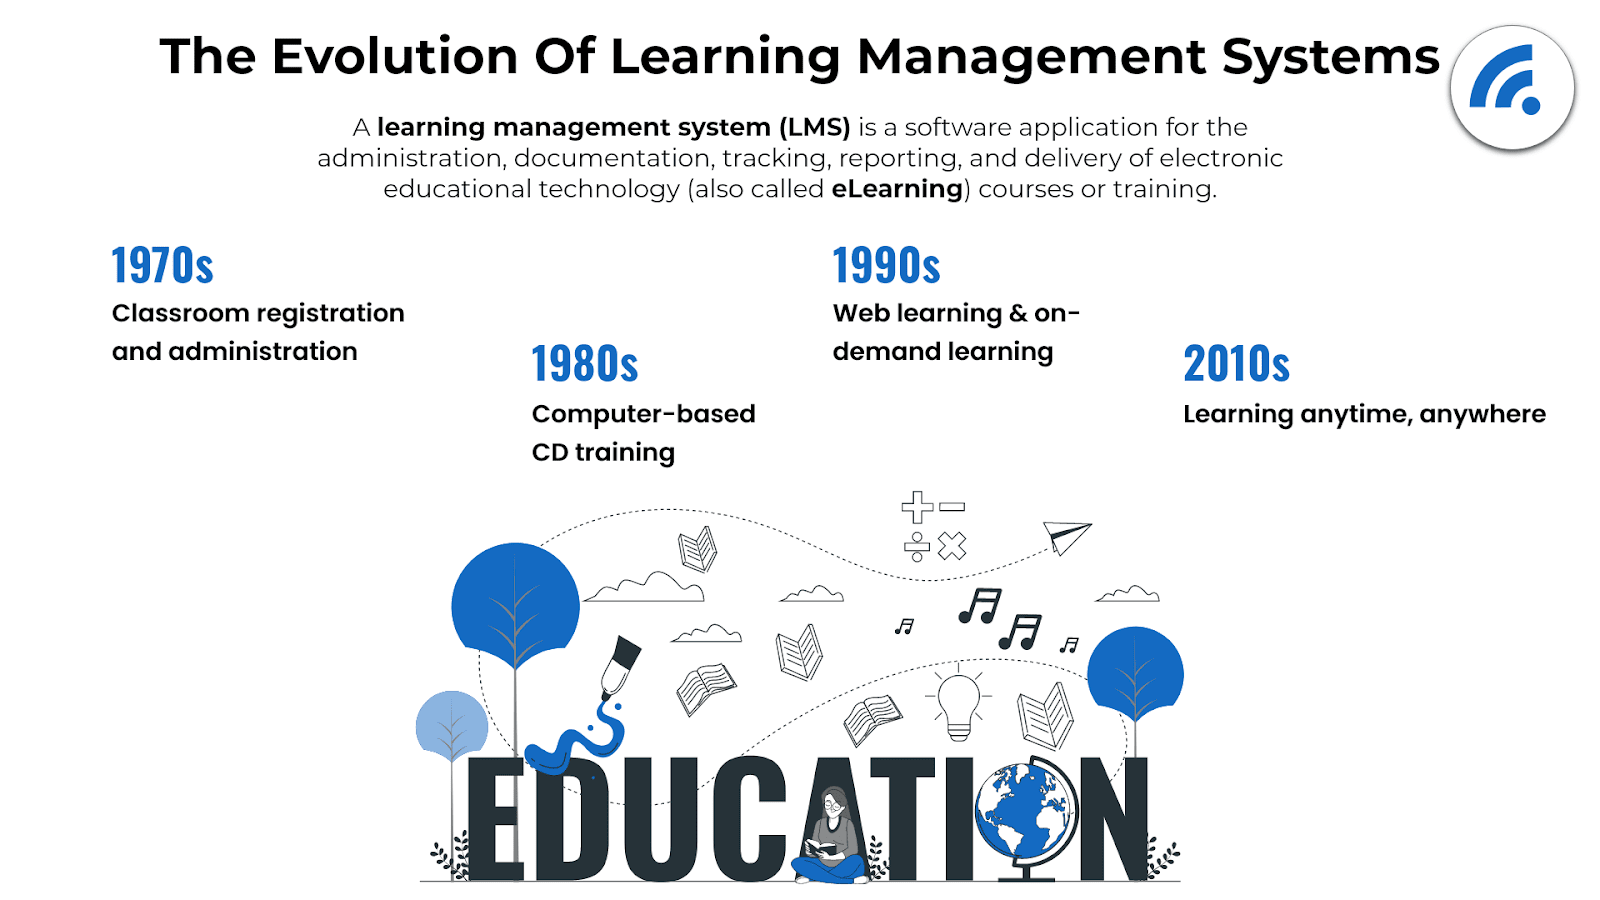 The evolution of learning management systems